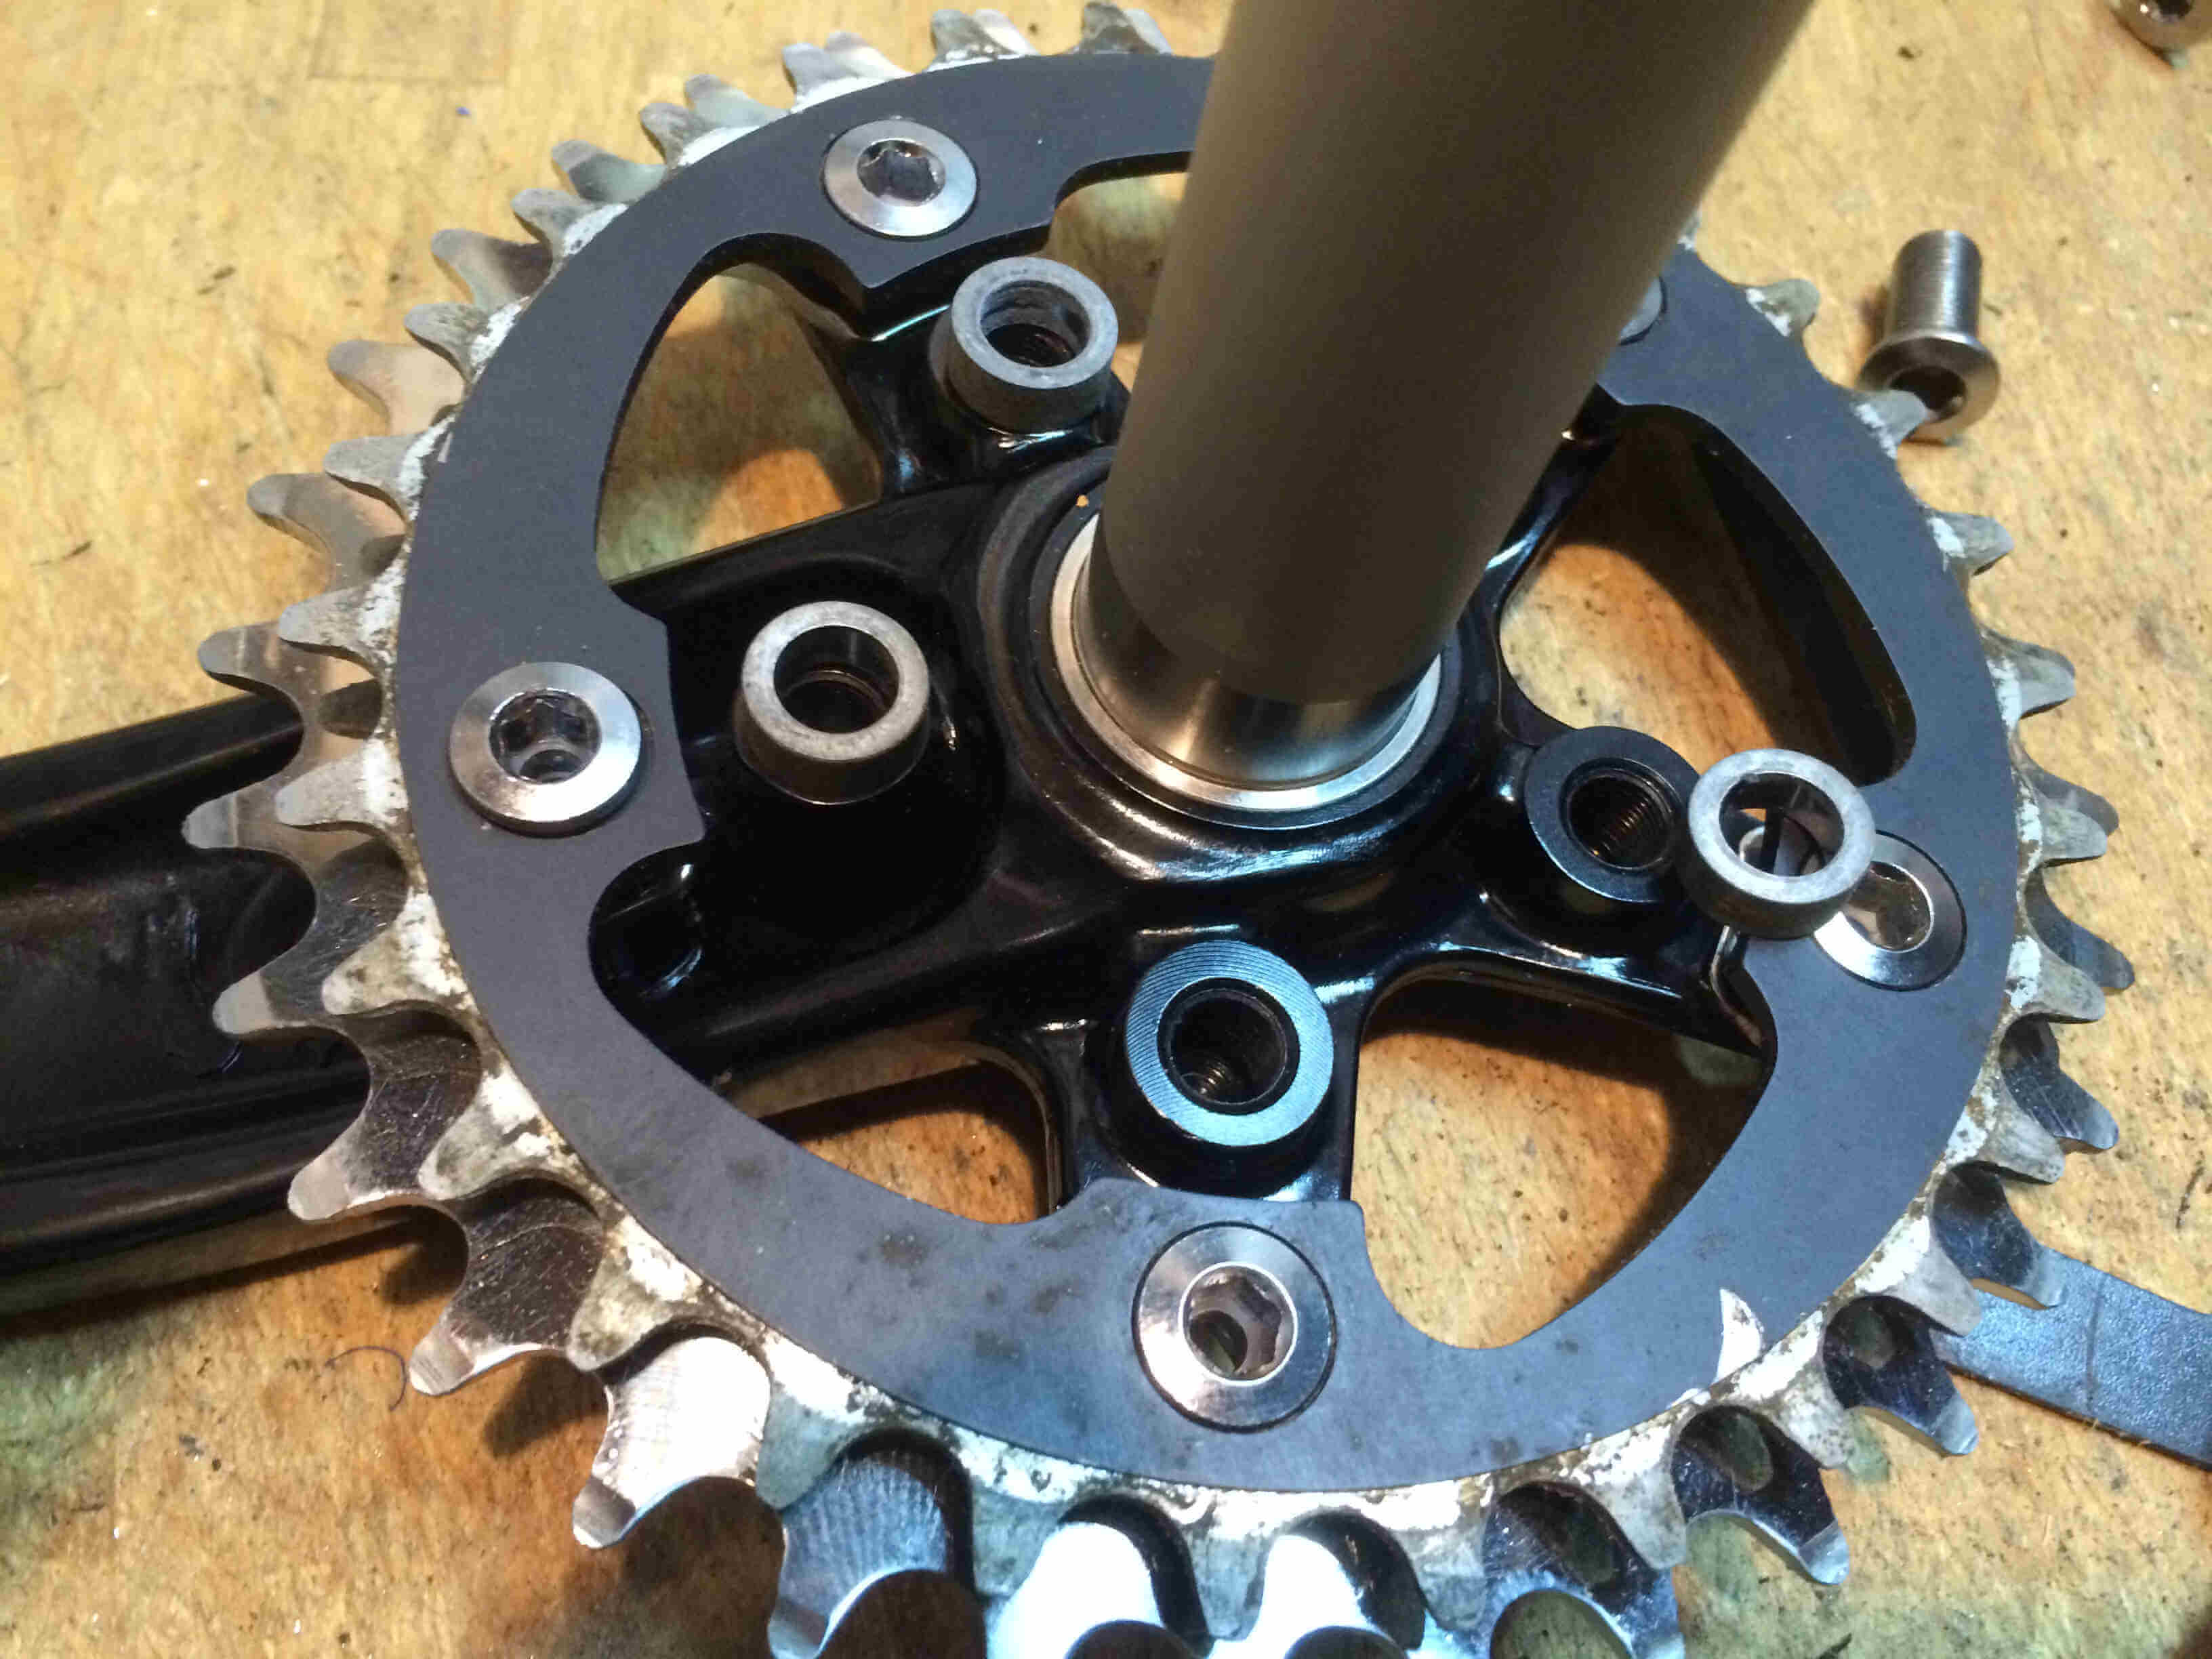 Downward, inside view of a Surly Bikes O.D Crankset, outer chainring detail, on a wood benchtop